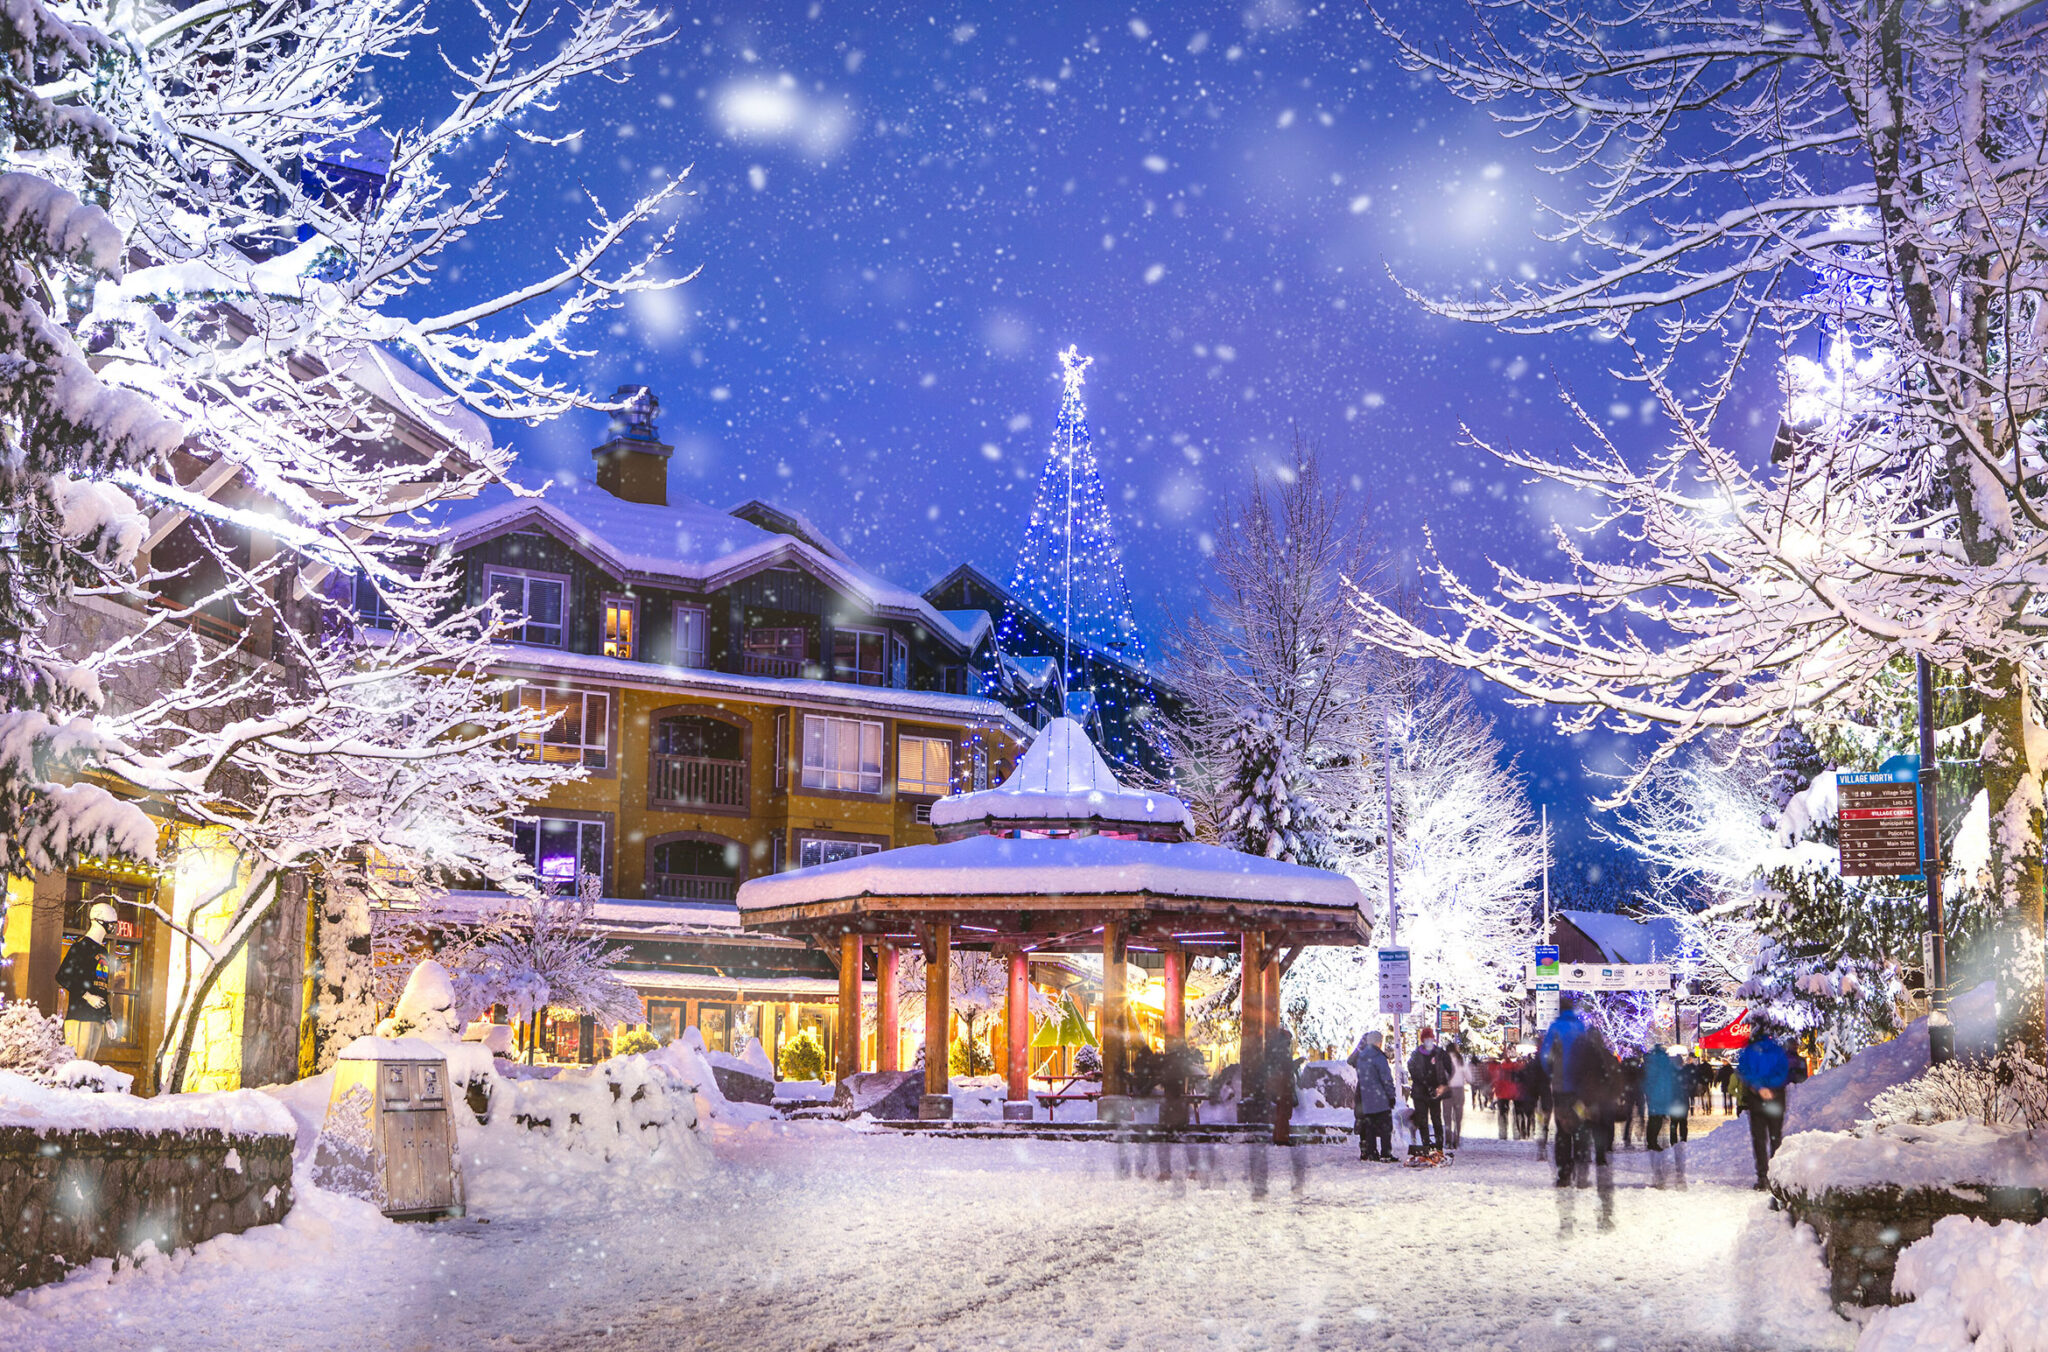 Whistler Village stroll with all its festive lights sparkling in the evening while snow falls.